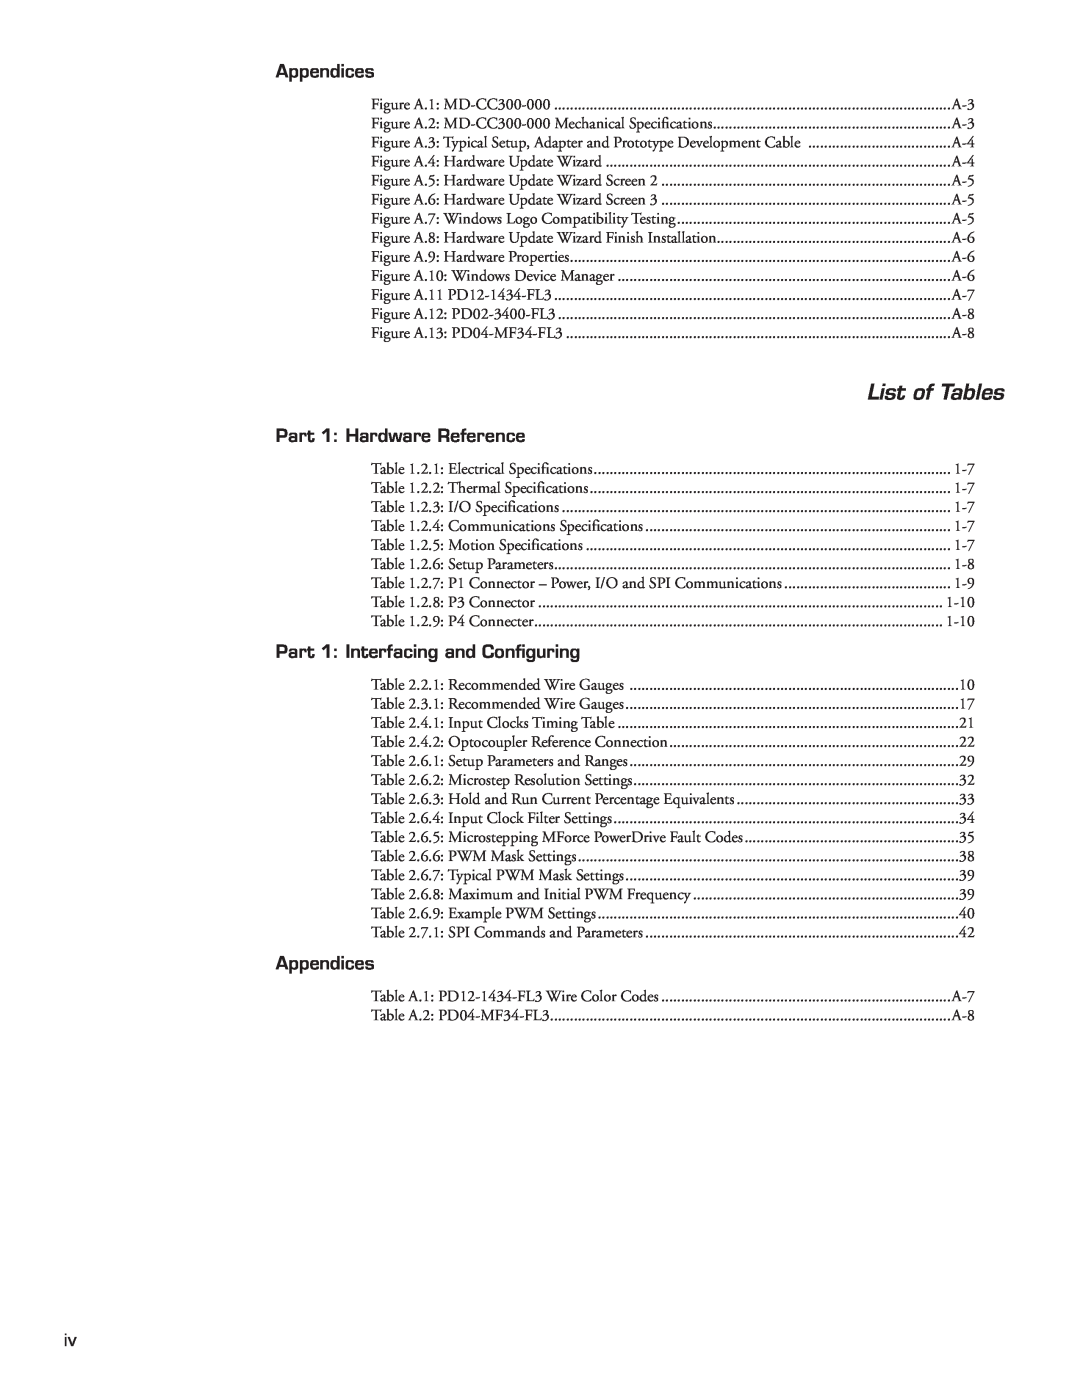 Intelligent Motion Systems Motion Detector operating instructions List of Tables, Appendices, Part 1 Hardware Reference 